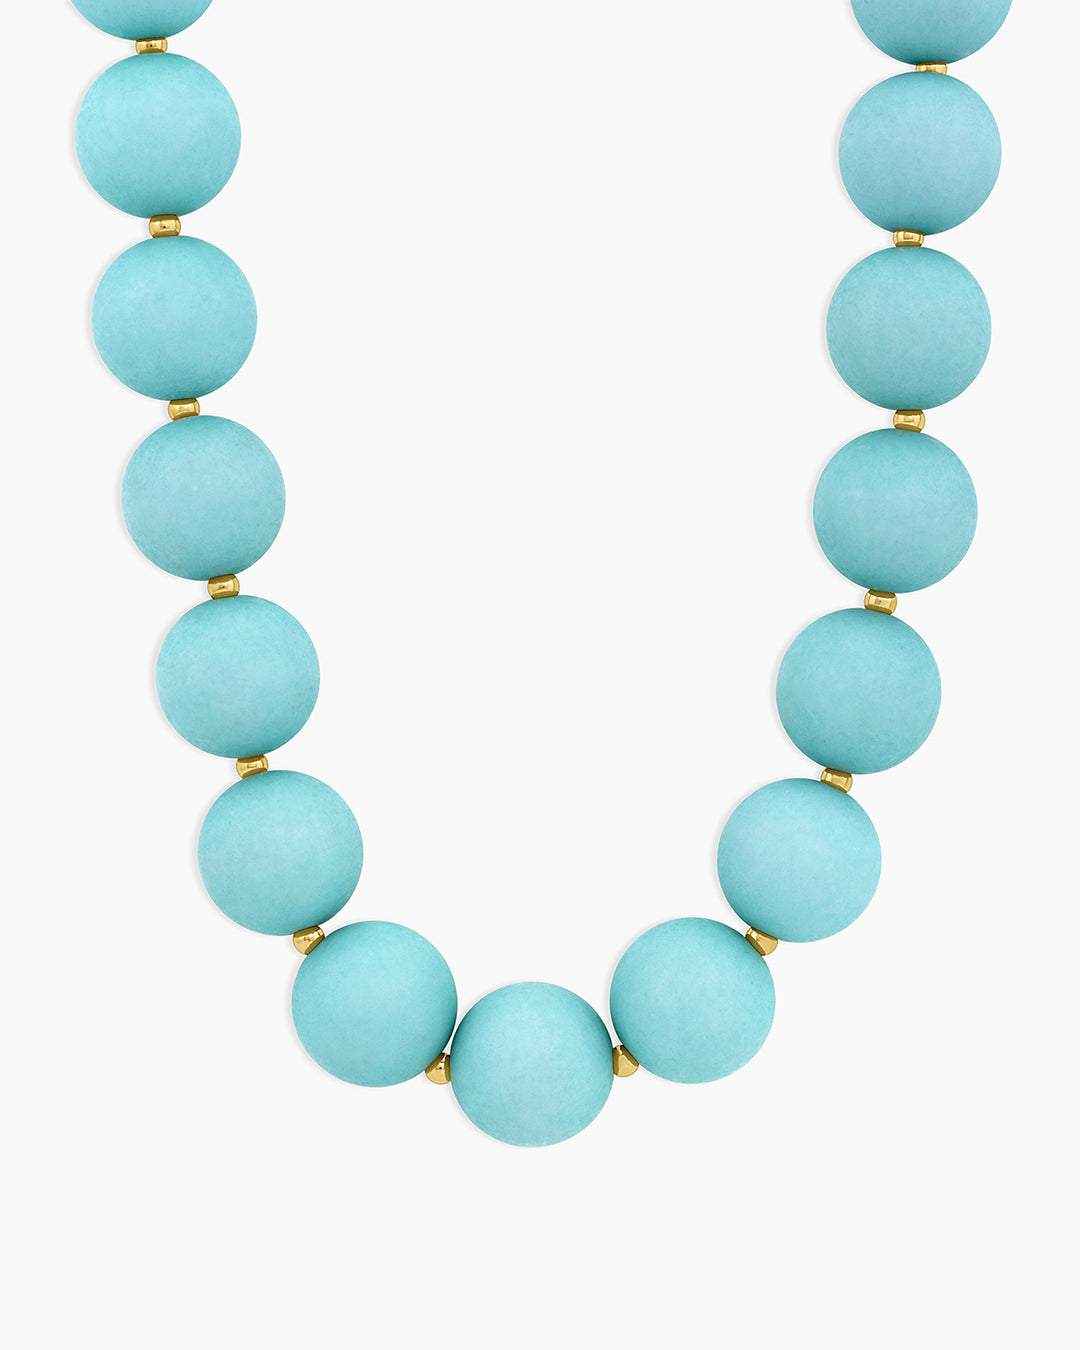 Blue and Teal Beaded Statement Necklace - MelleBelleShop